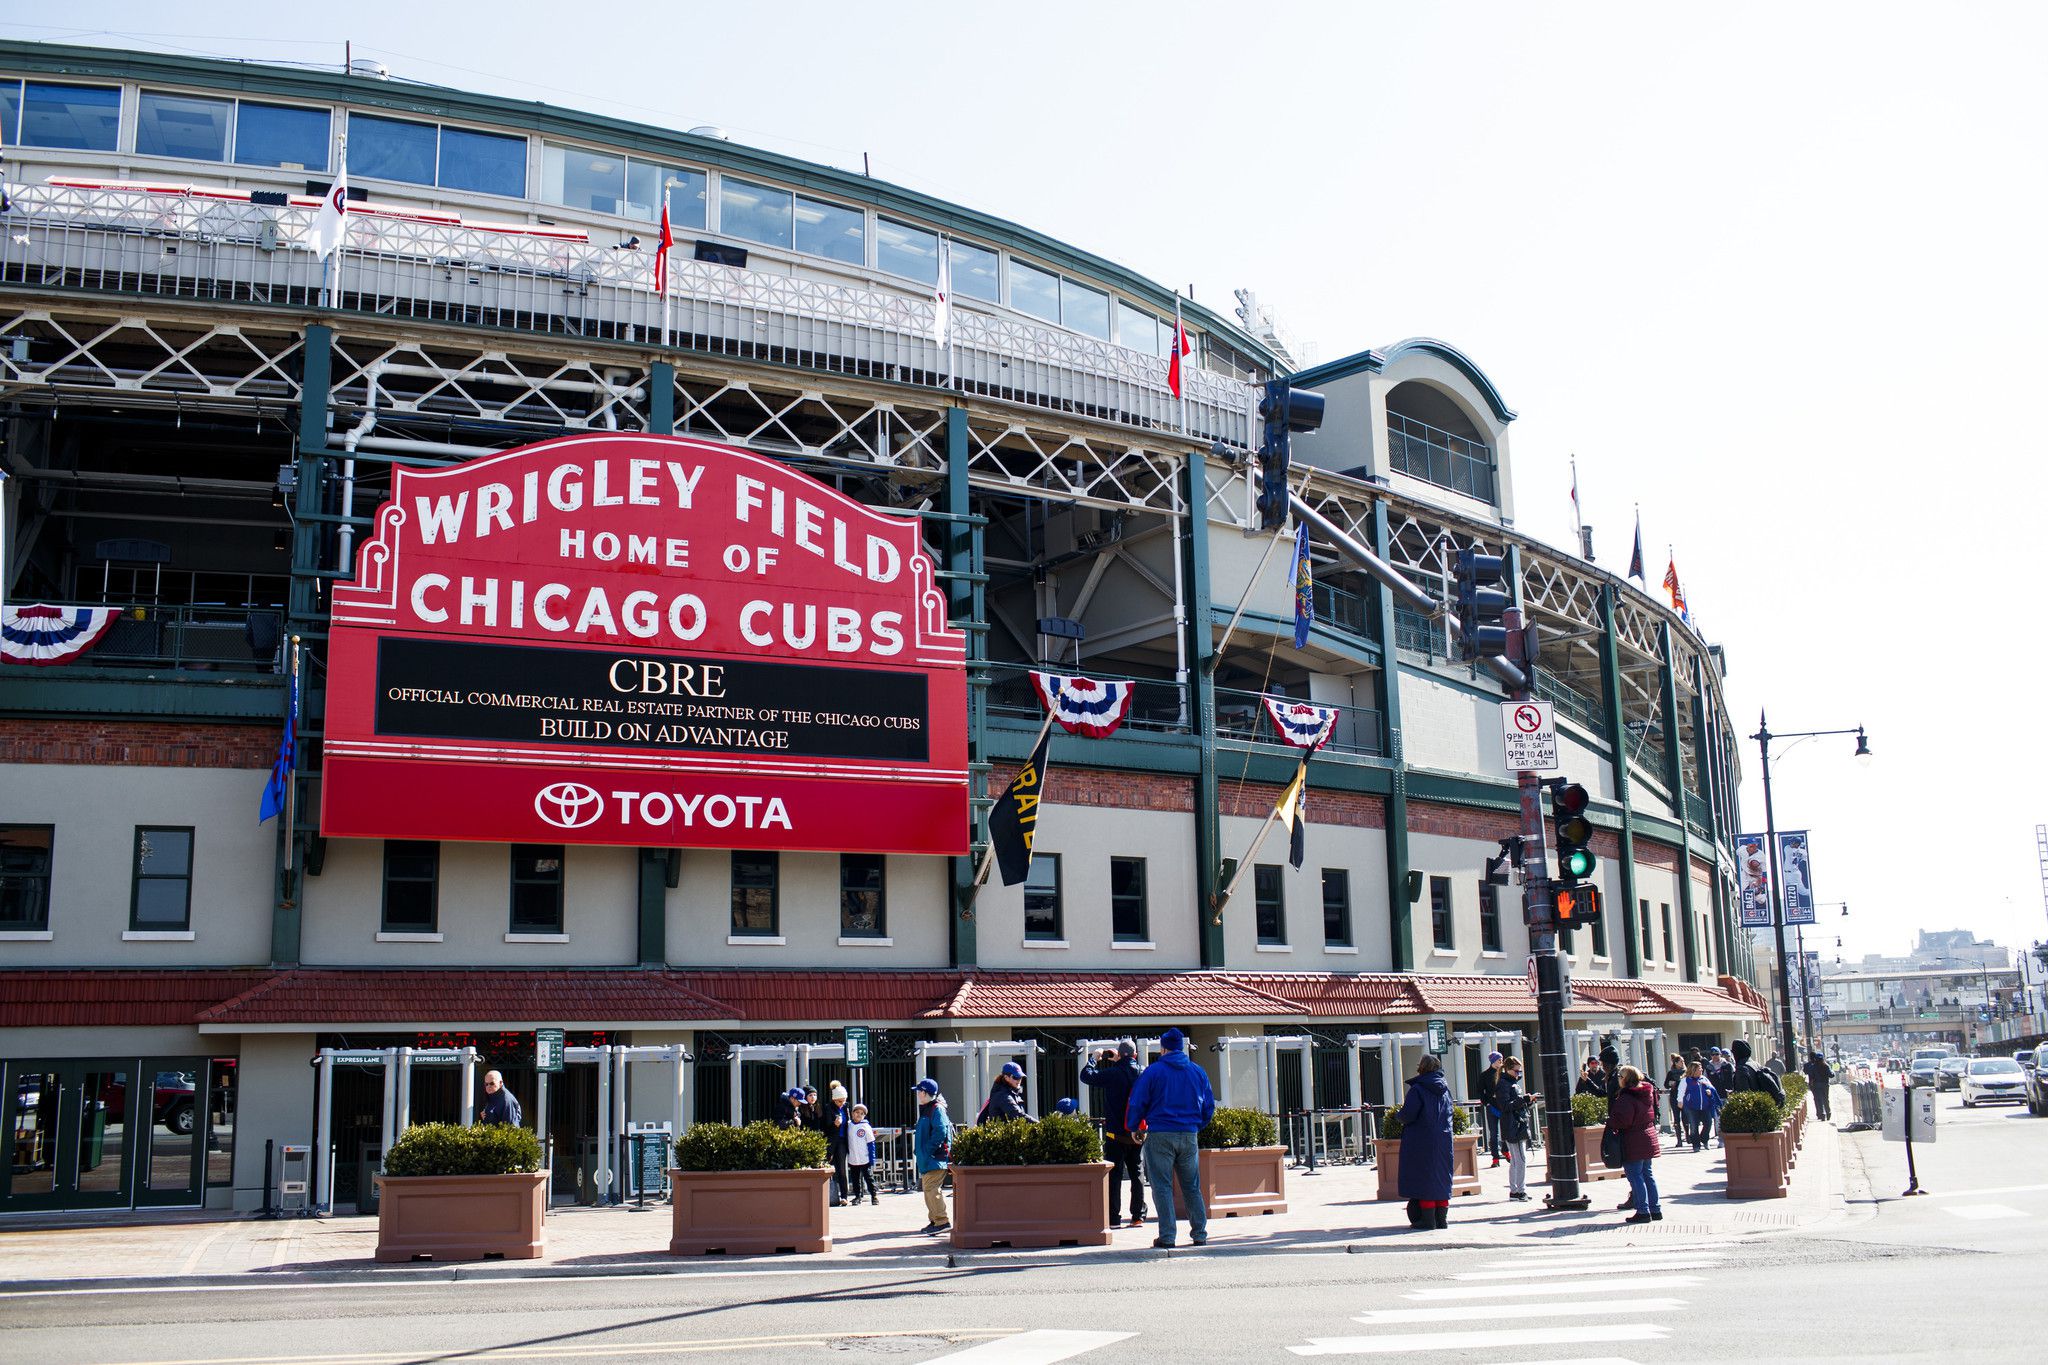 Chicago Cubs' 106-year-old Wrigley Field receives federal landmark status